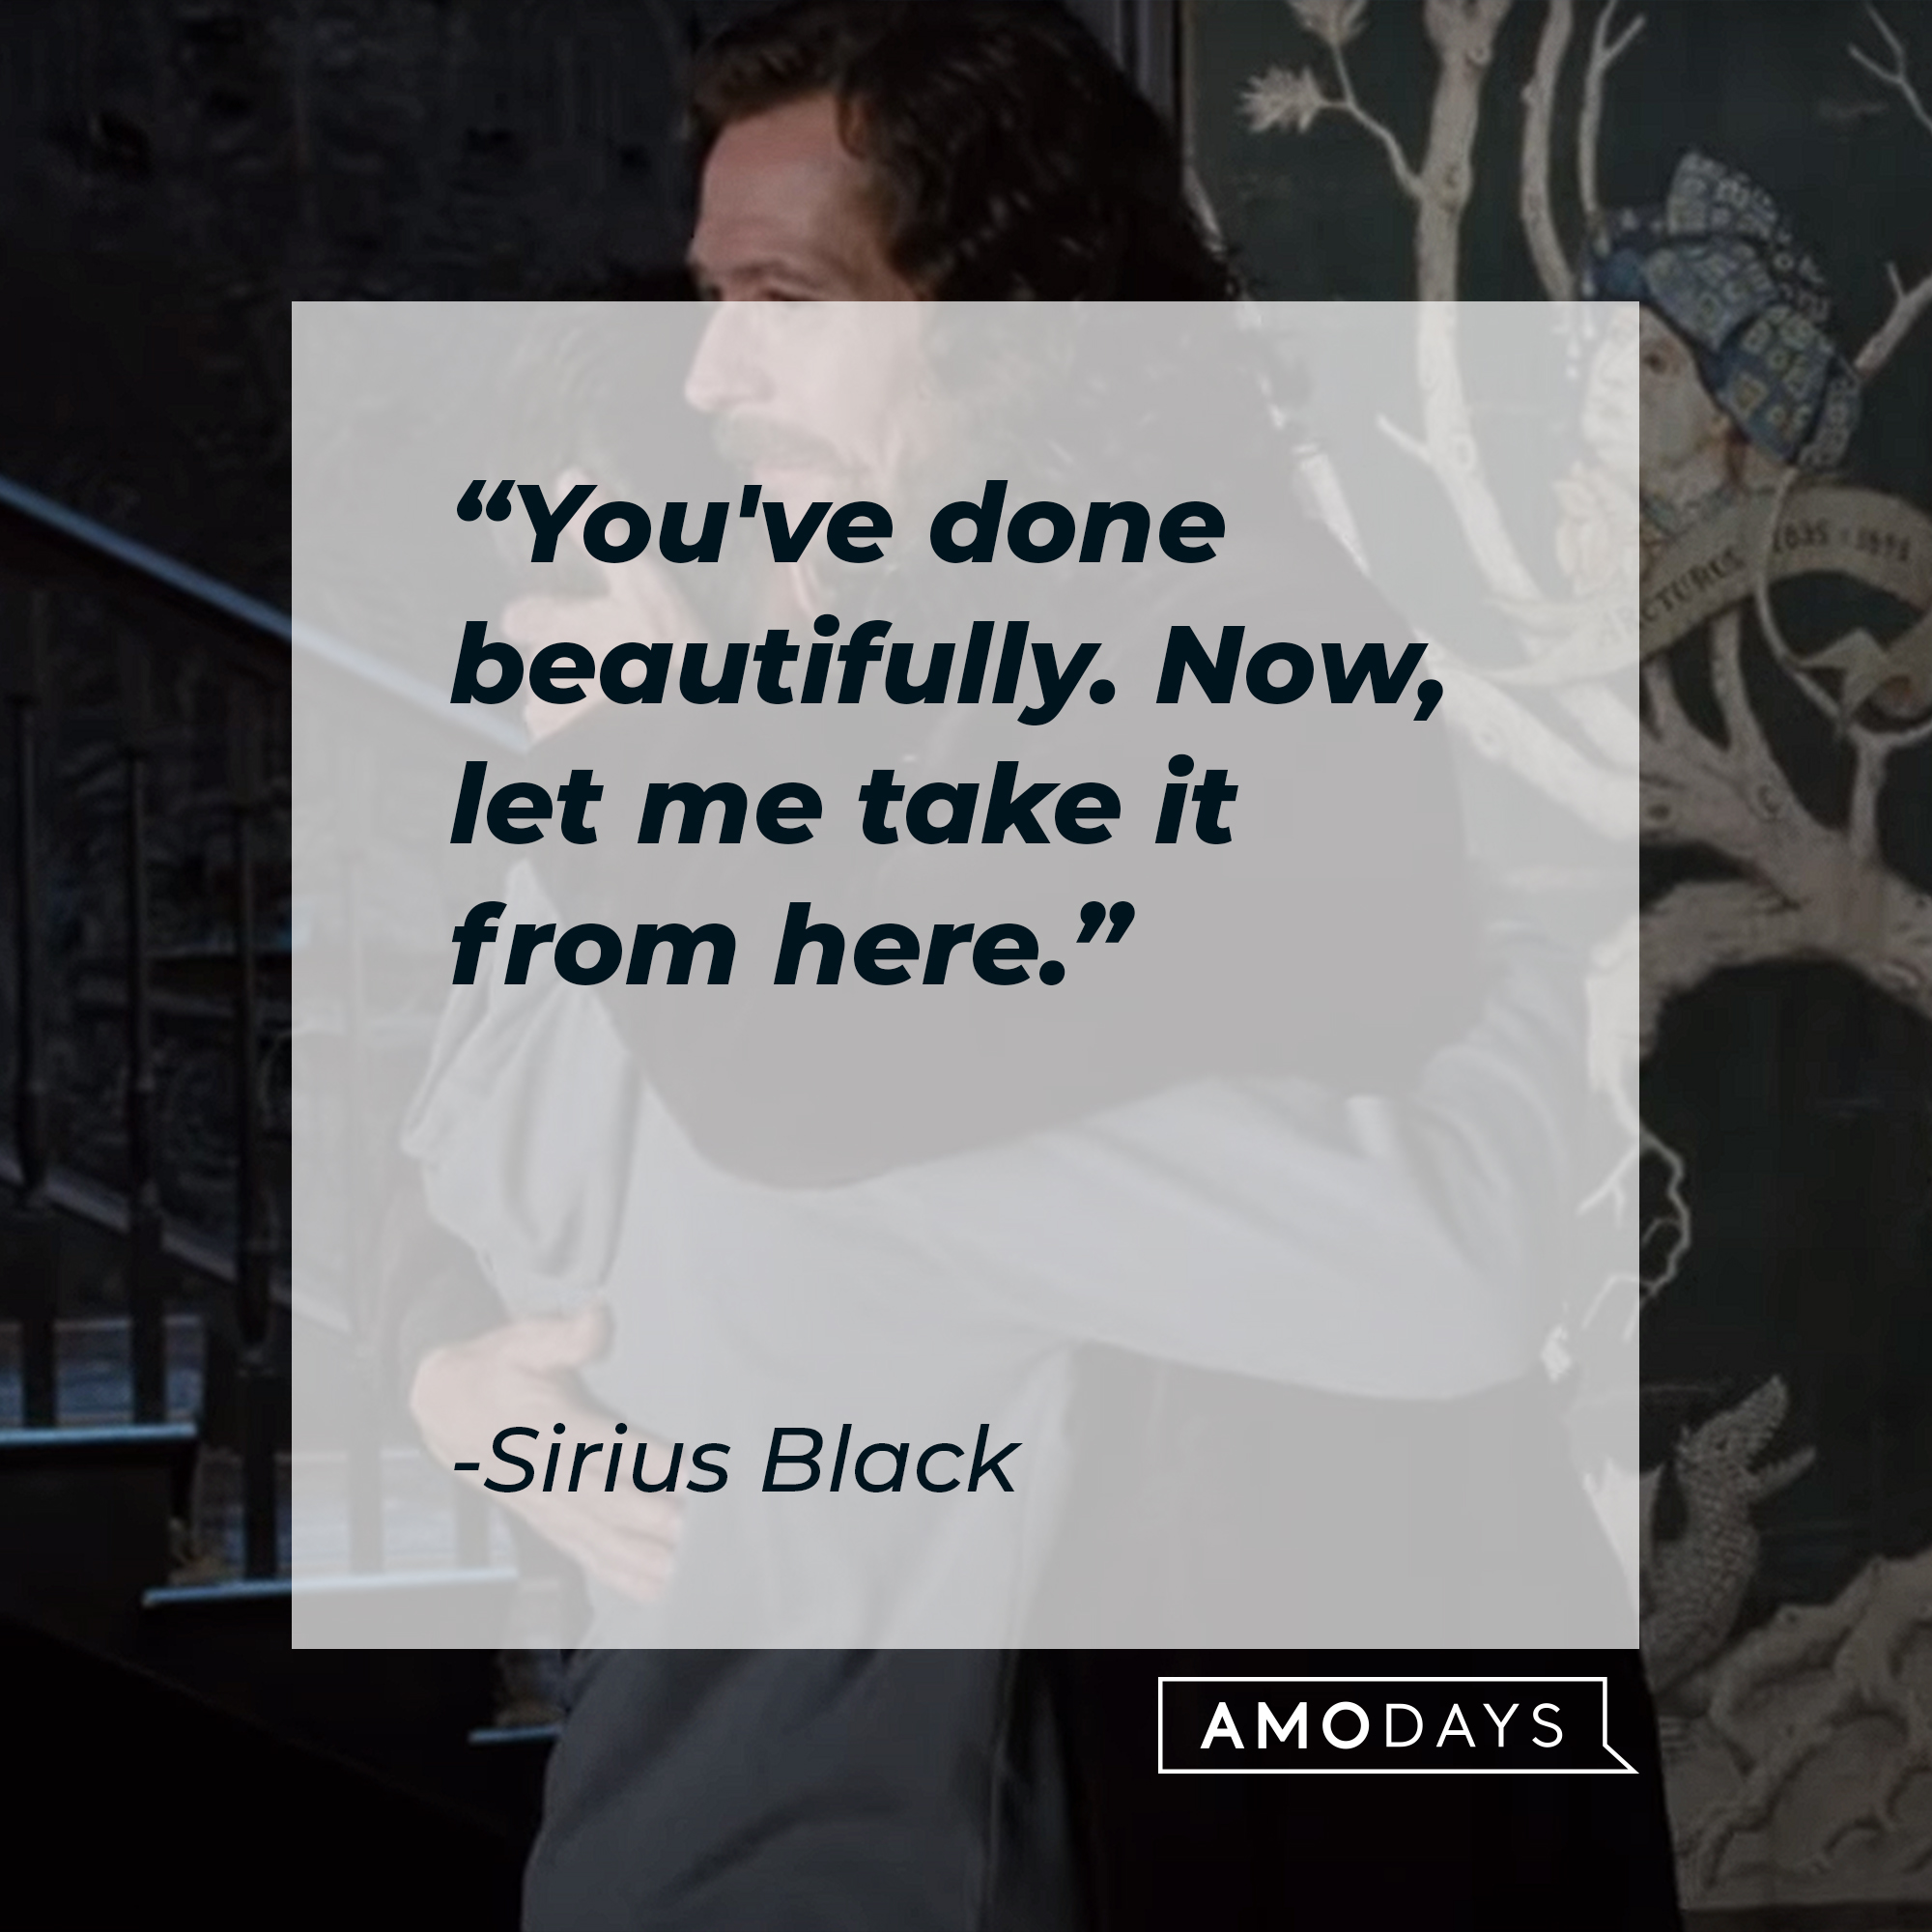 Sirius Black's quote: "You've done beautifully. Now, let me take it from here." | Source: YouTube/harrypotter